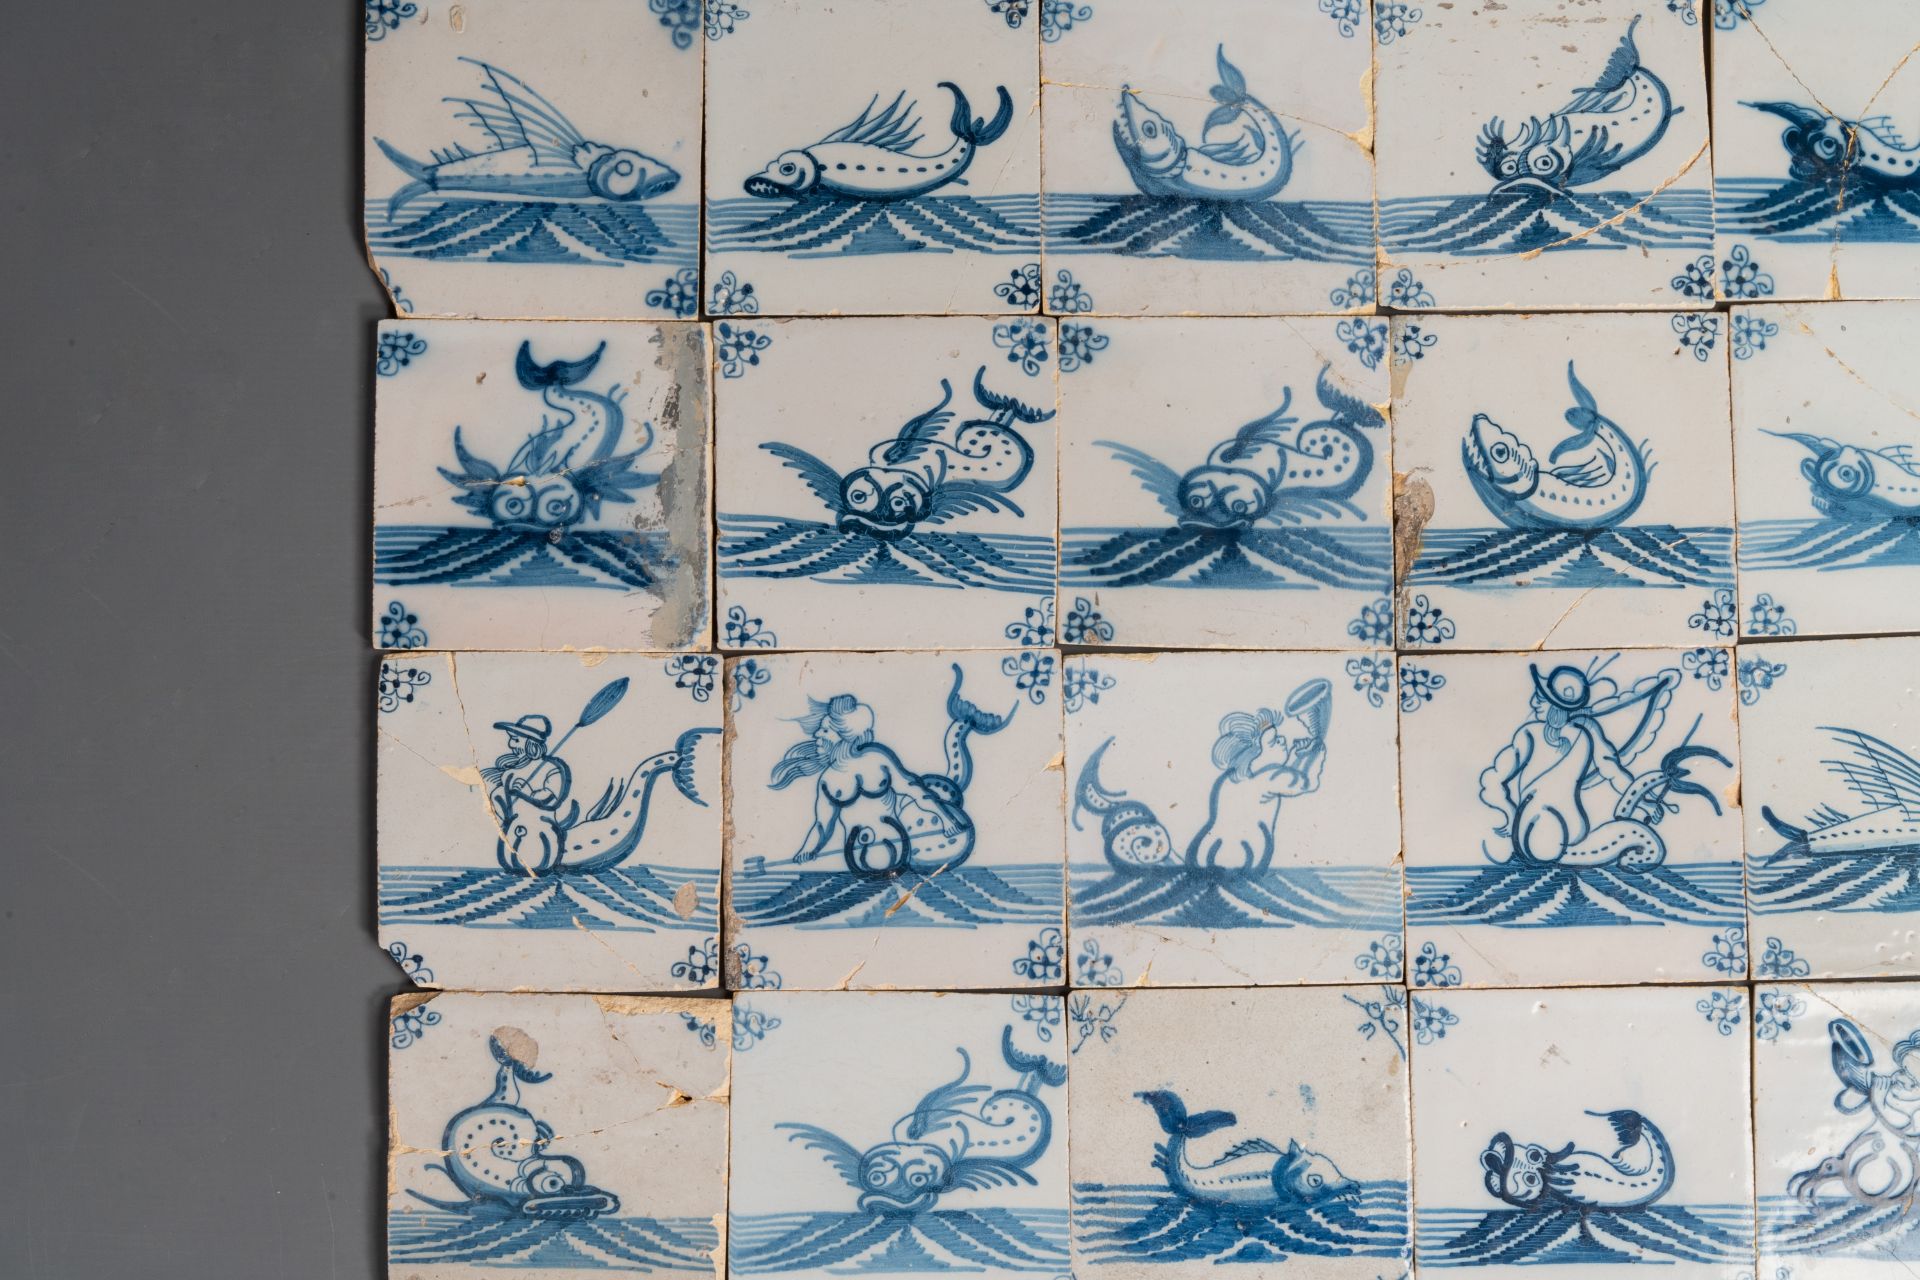 92 blue and white Dutch Delft tiles with sea monsters and ships, 18th C. - Image 6 of 16